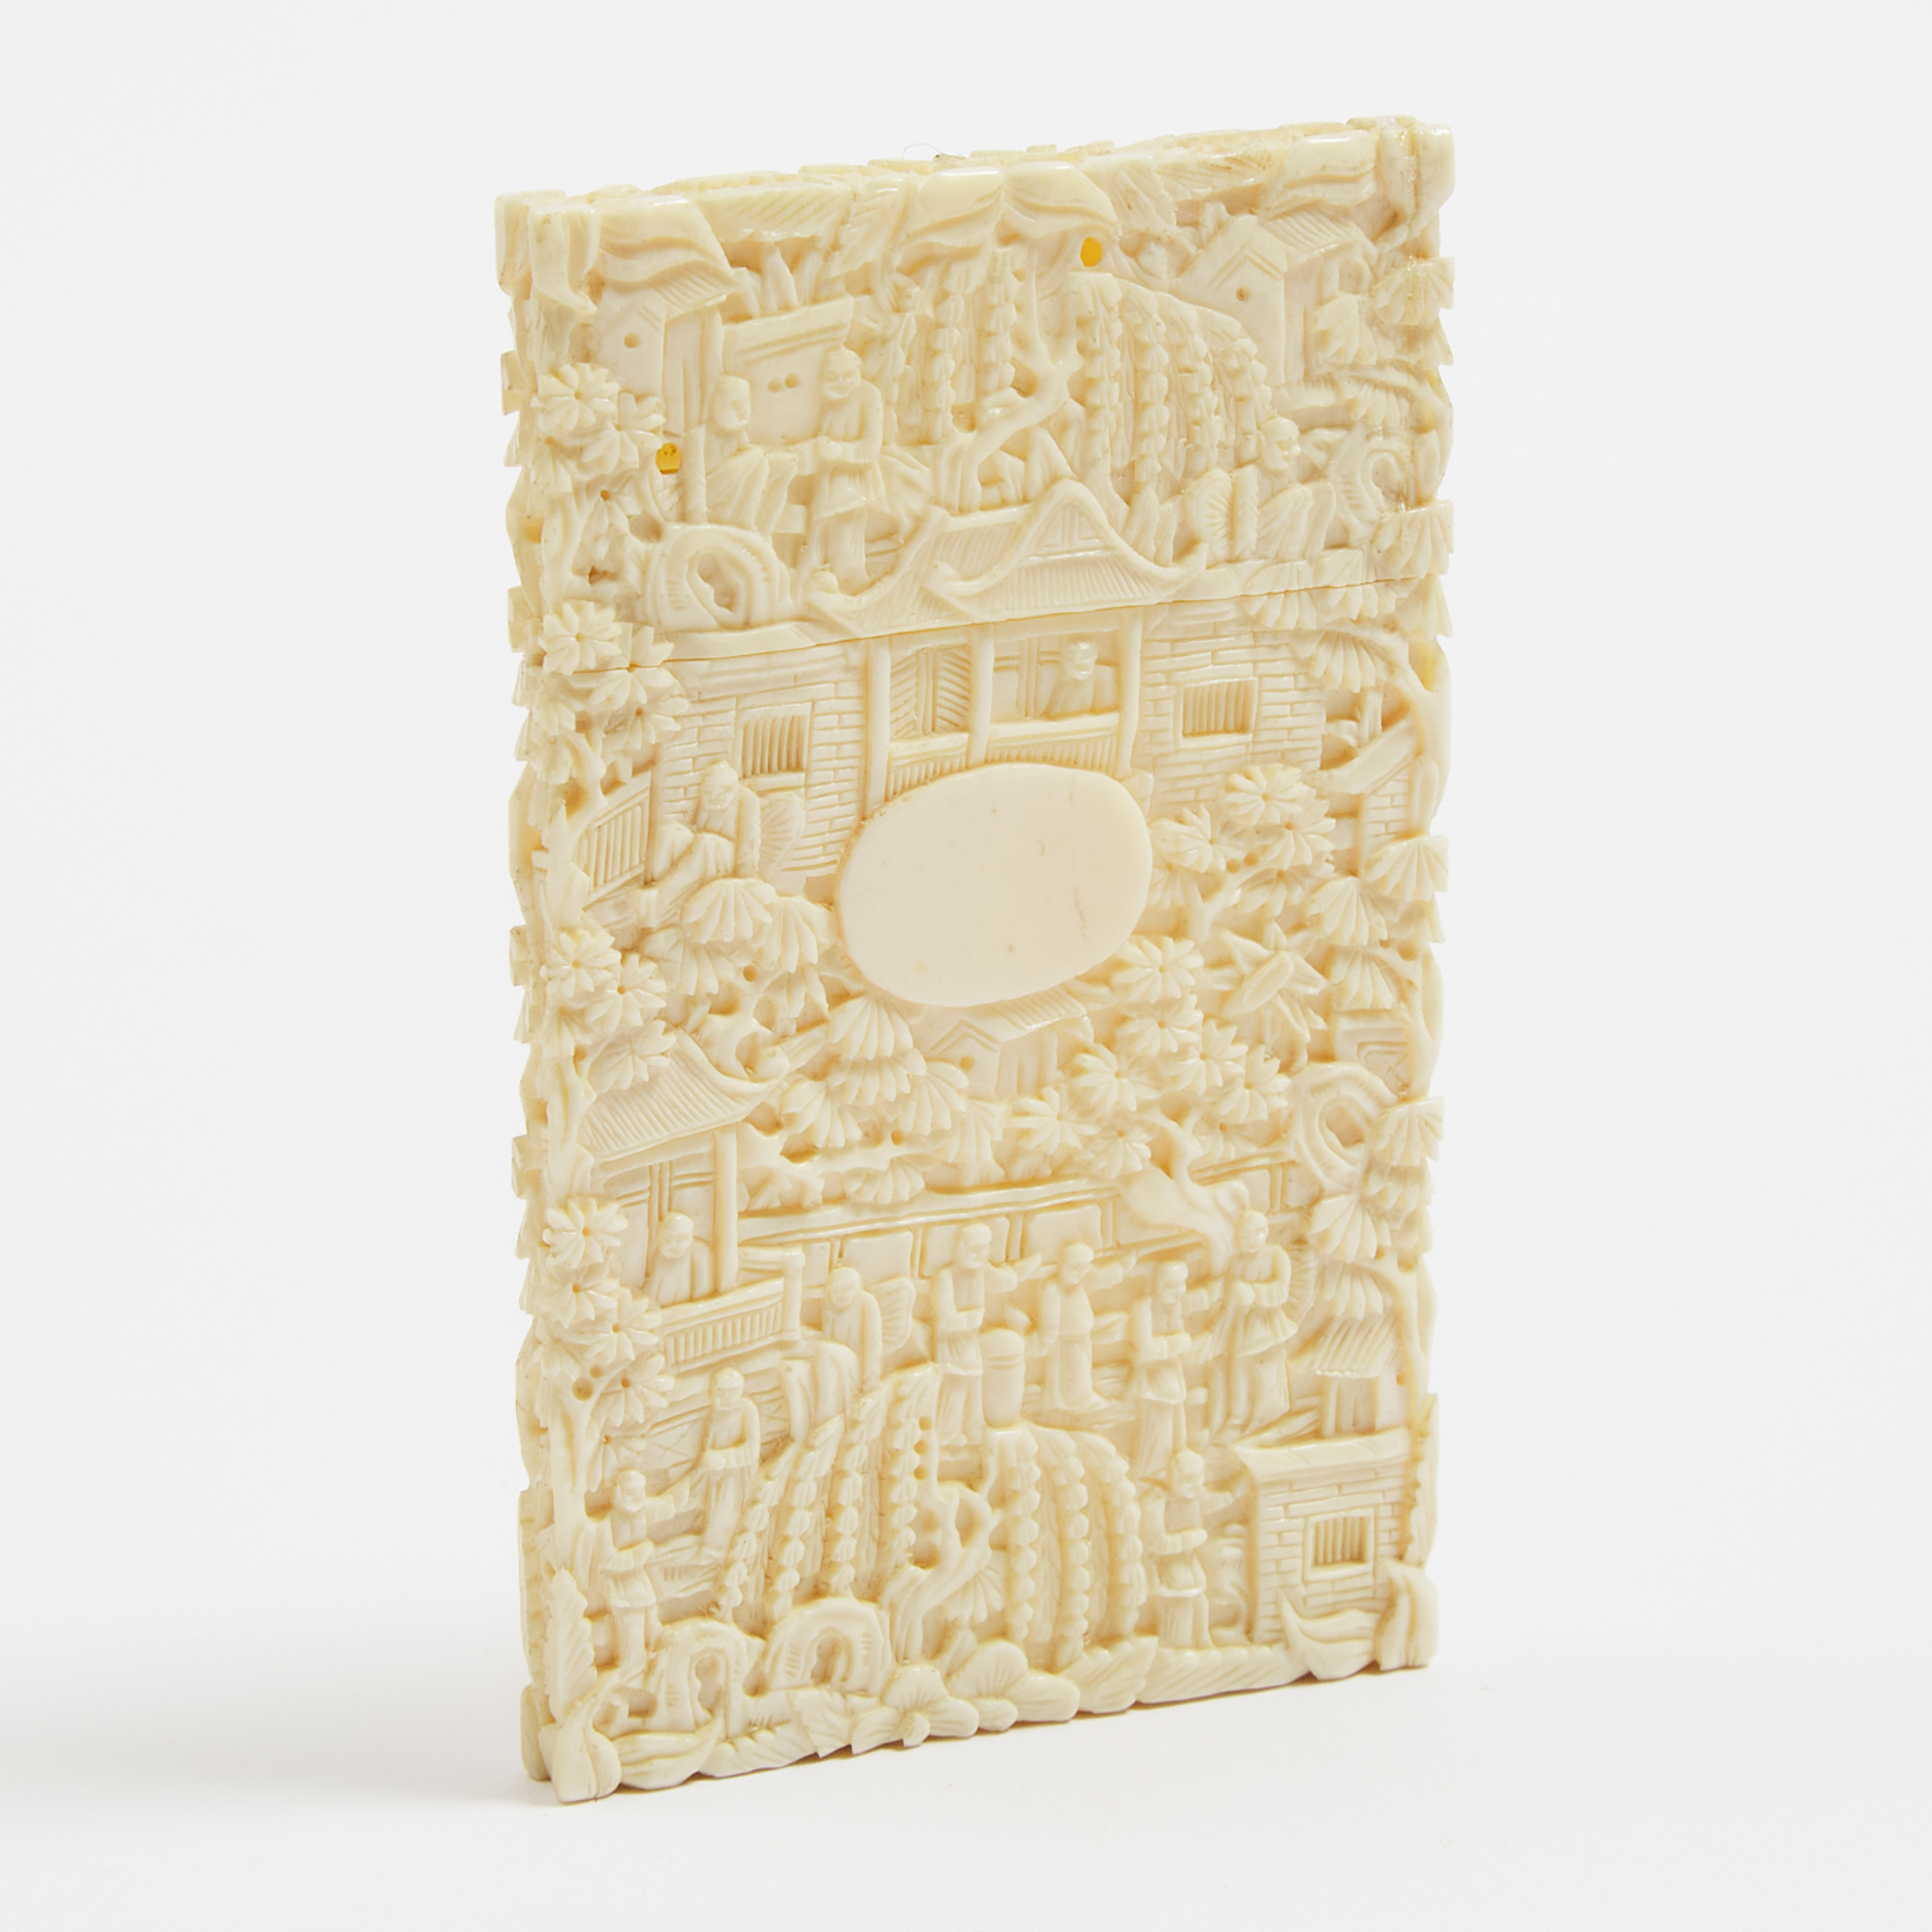 A Chinese Canton Carved Ivory Card 3ab92c